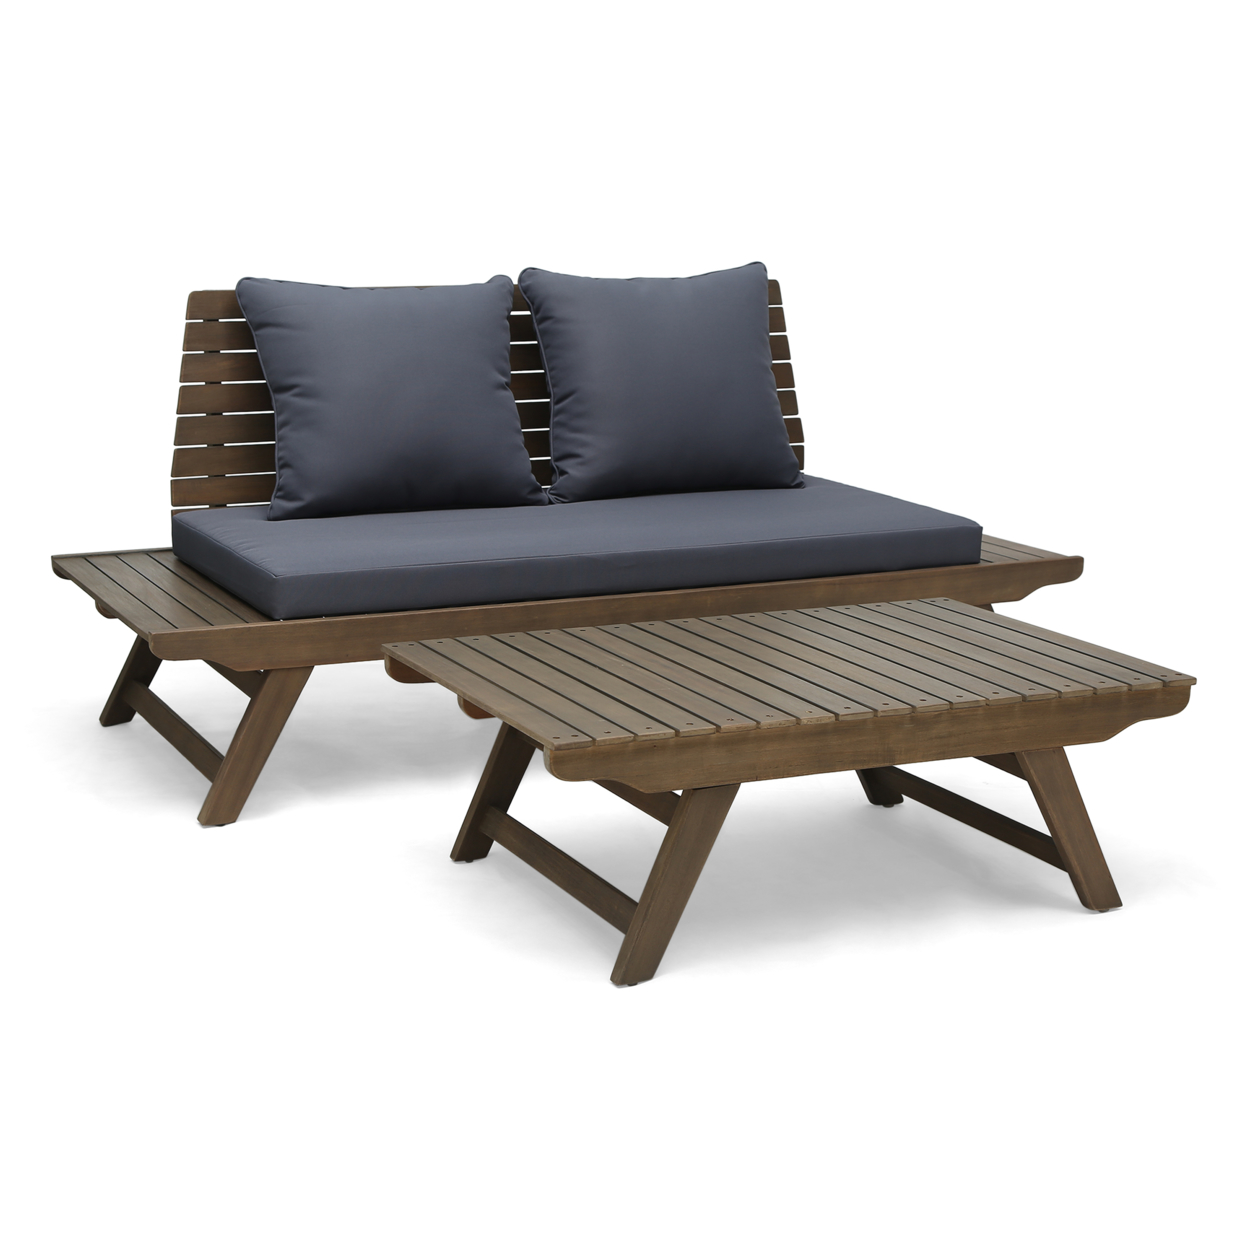 Enid Outdoor 2 Seater Acacia Wood Loveseat And Coffee Table Set - Gray + Dark Gray